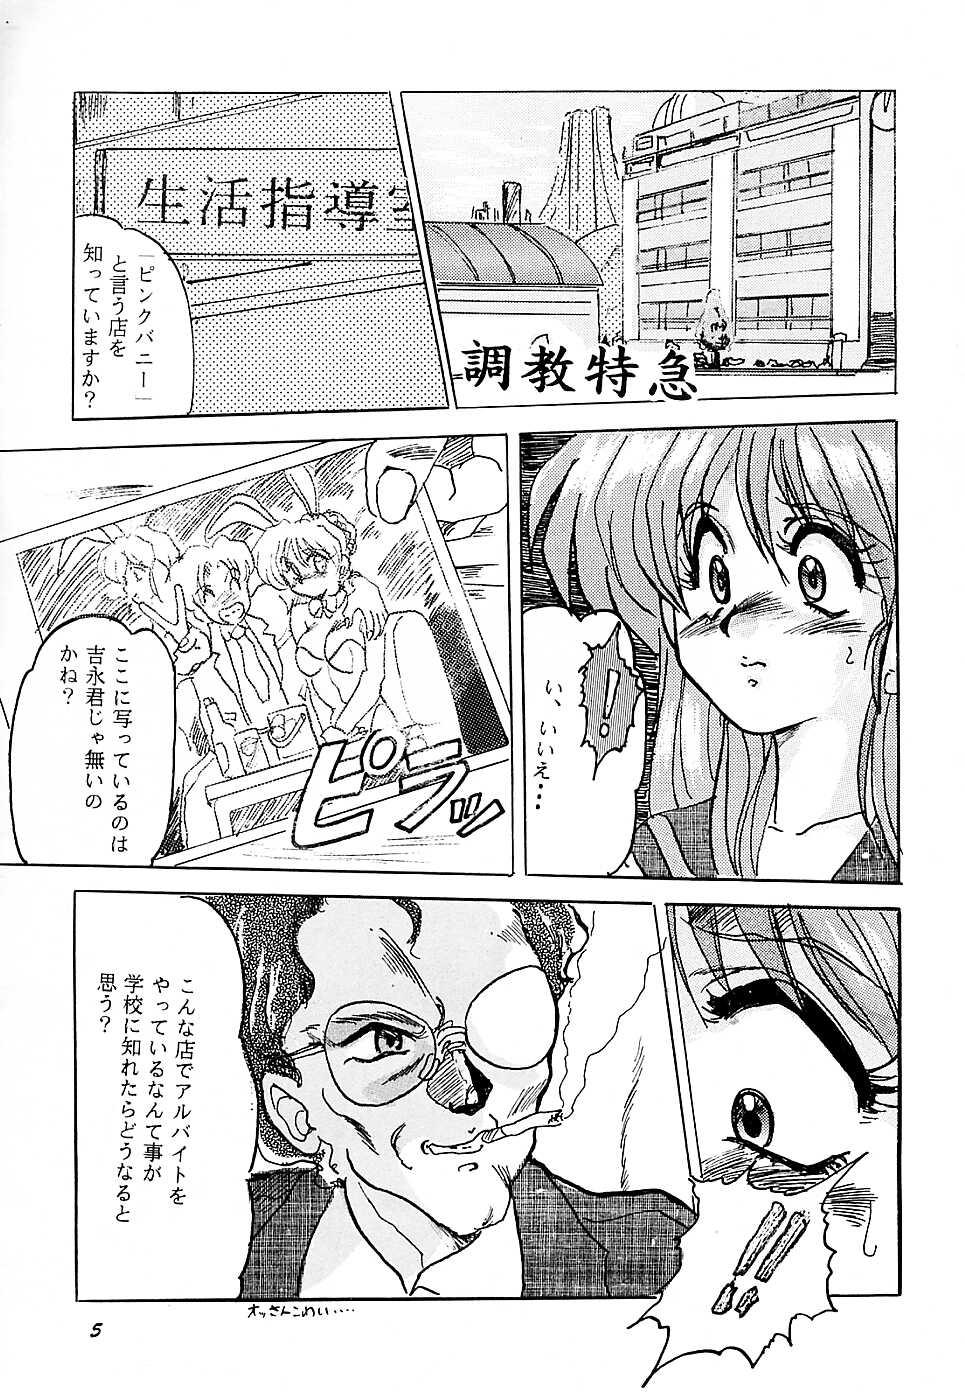 Curves F 93C - Brave express might gaine Heels - Page 4